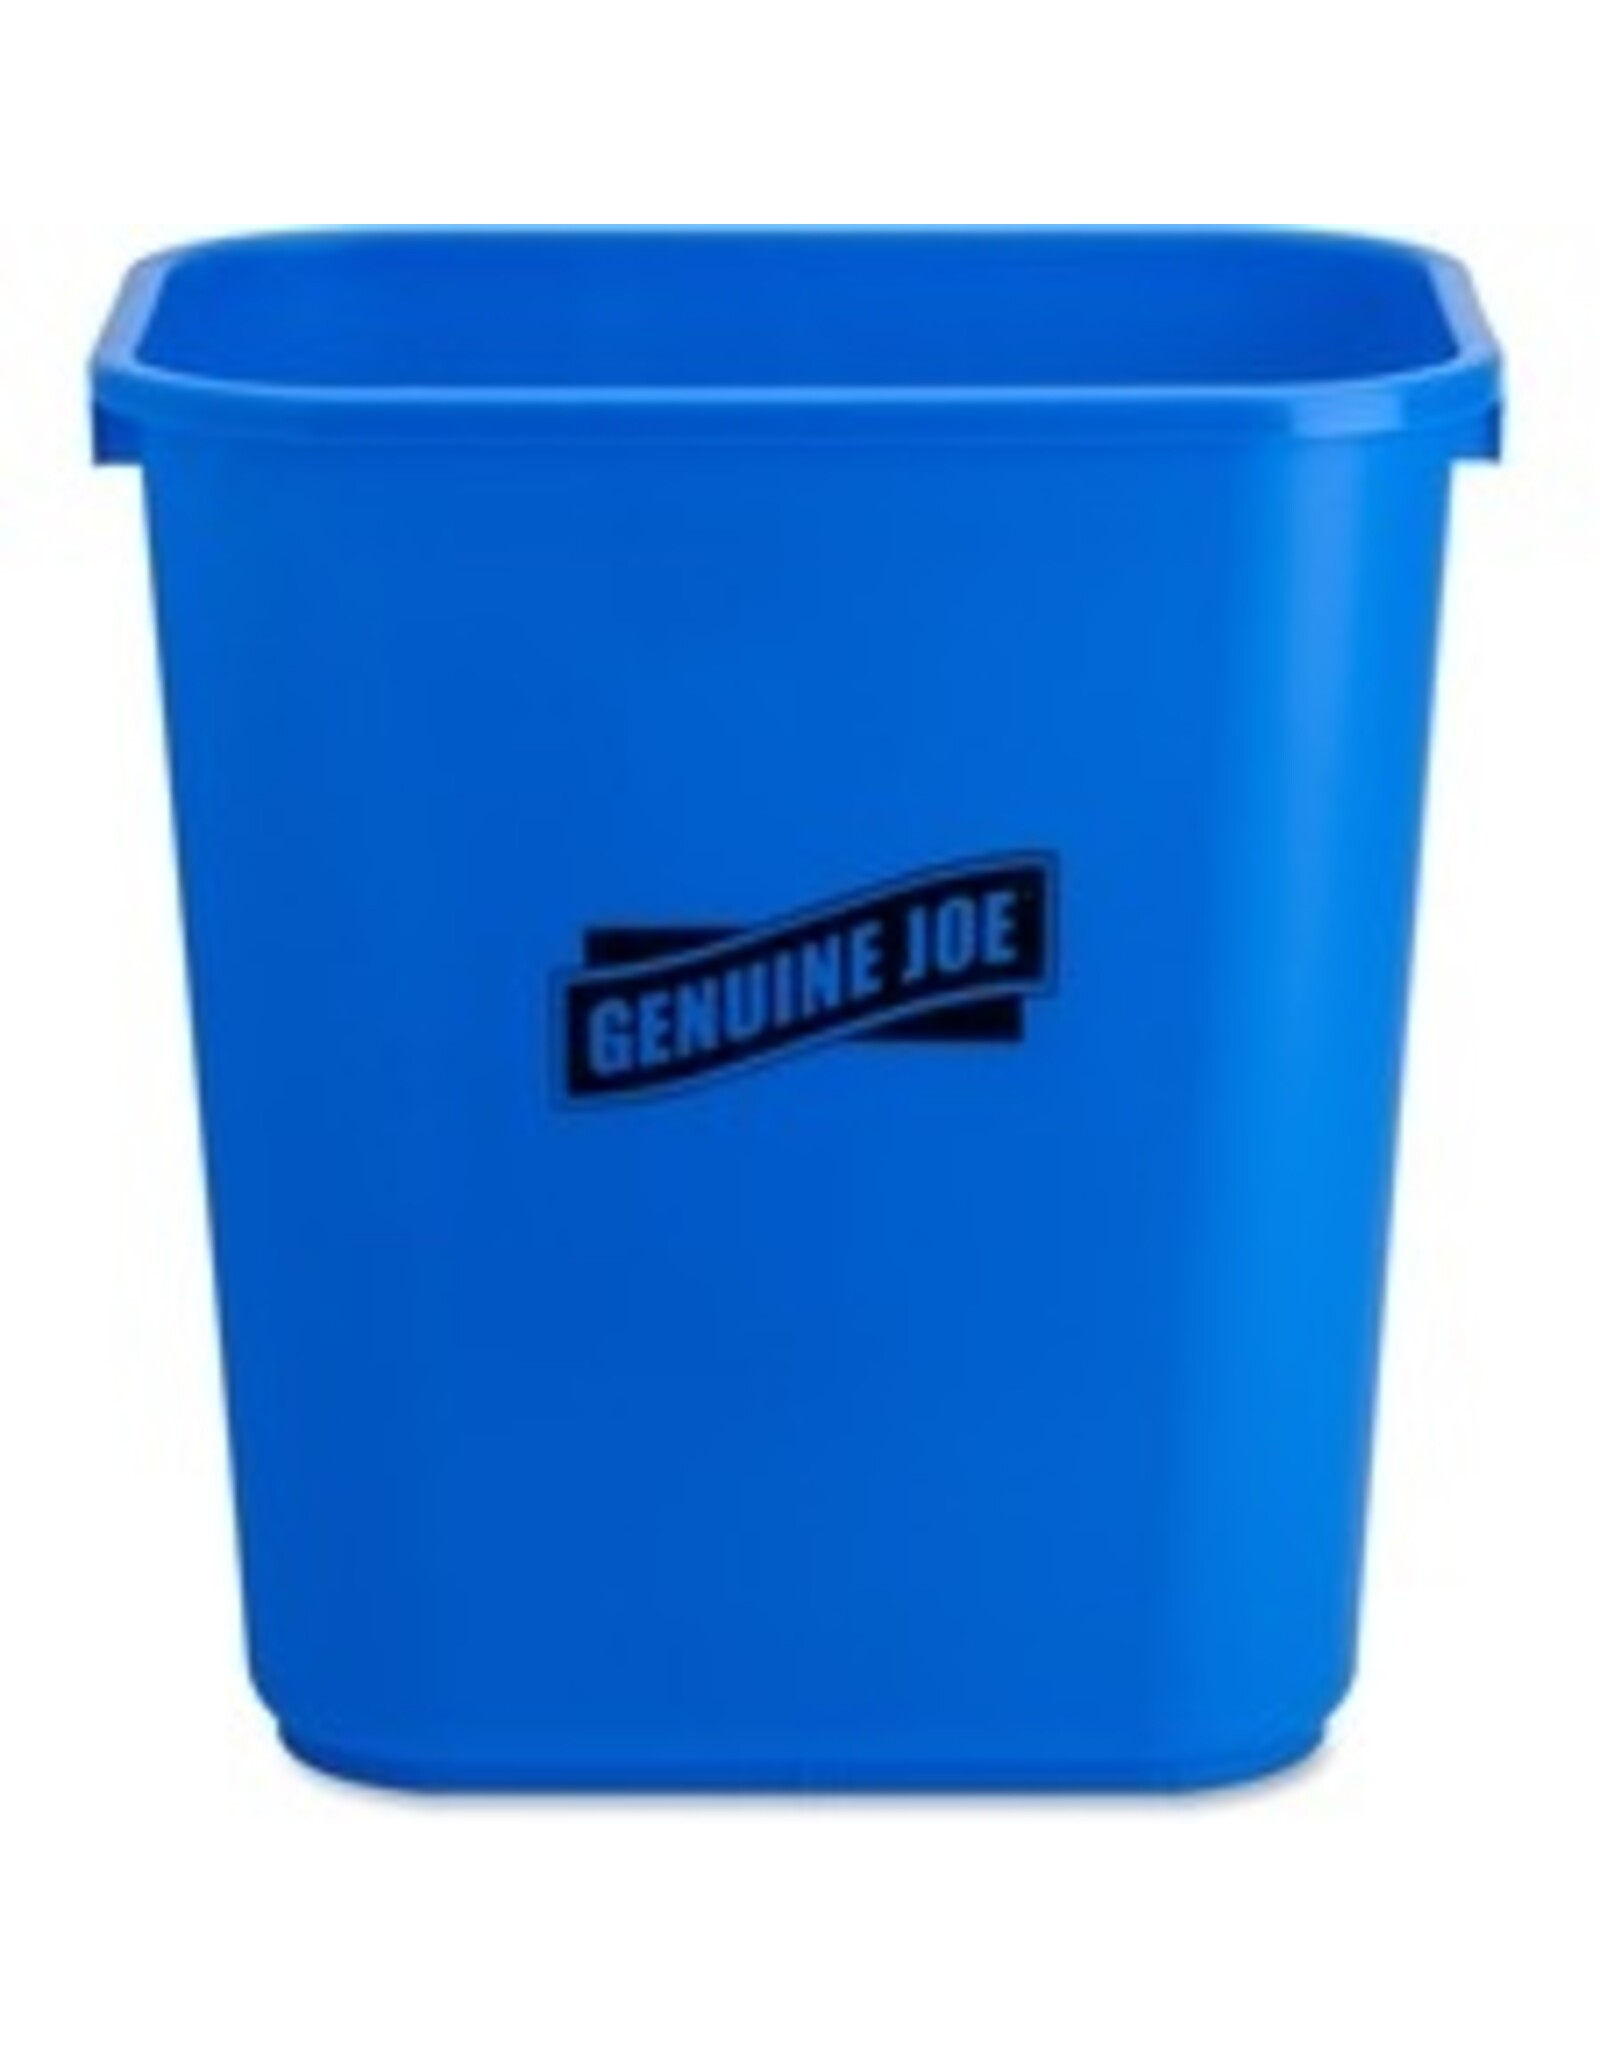 WASTEBASKET,RECYCLE,28 QT